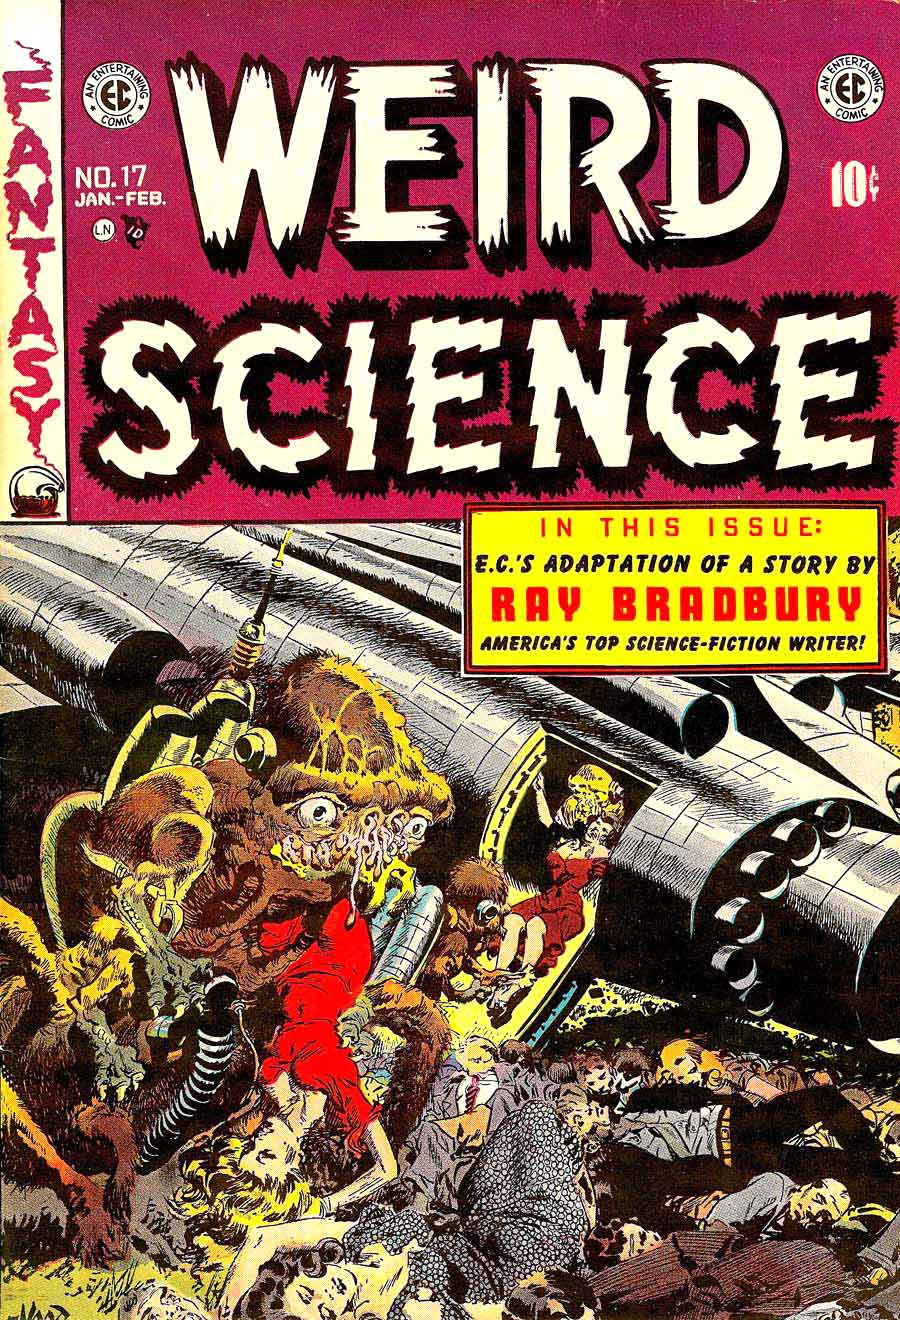 Wally Wood ec science fiction golden age 1950s comic book cover - Weird Science v2 #17